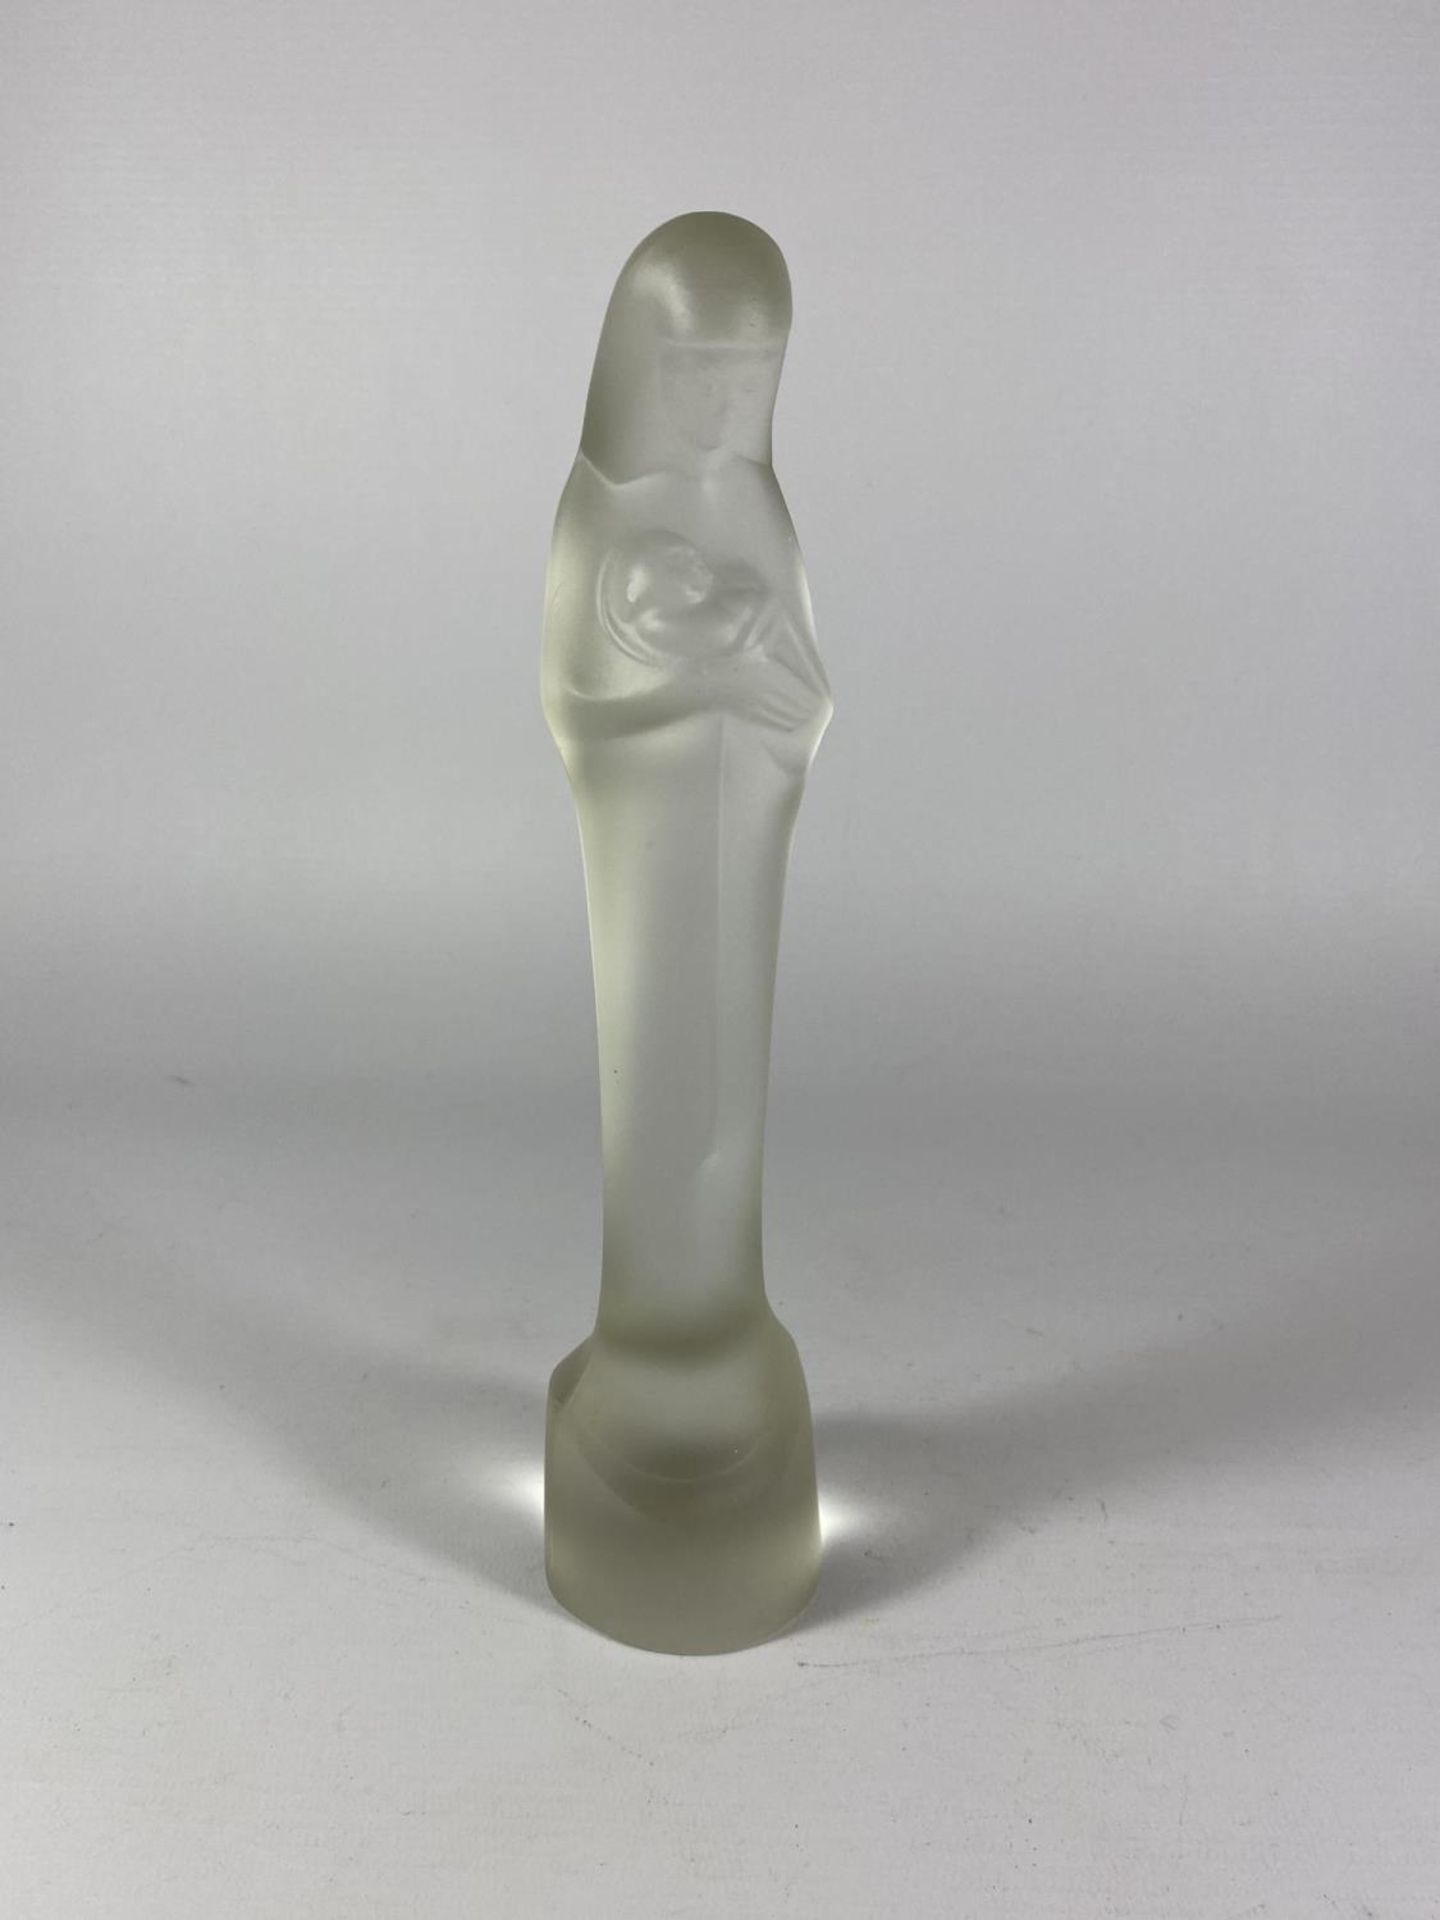 A ROYAL LEERDAM ART DECO STYLE FROSTED GLASS MODEL OF MADONNA & CHILD BY STEF UITERWALL, SIGNED TO